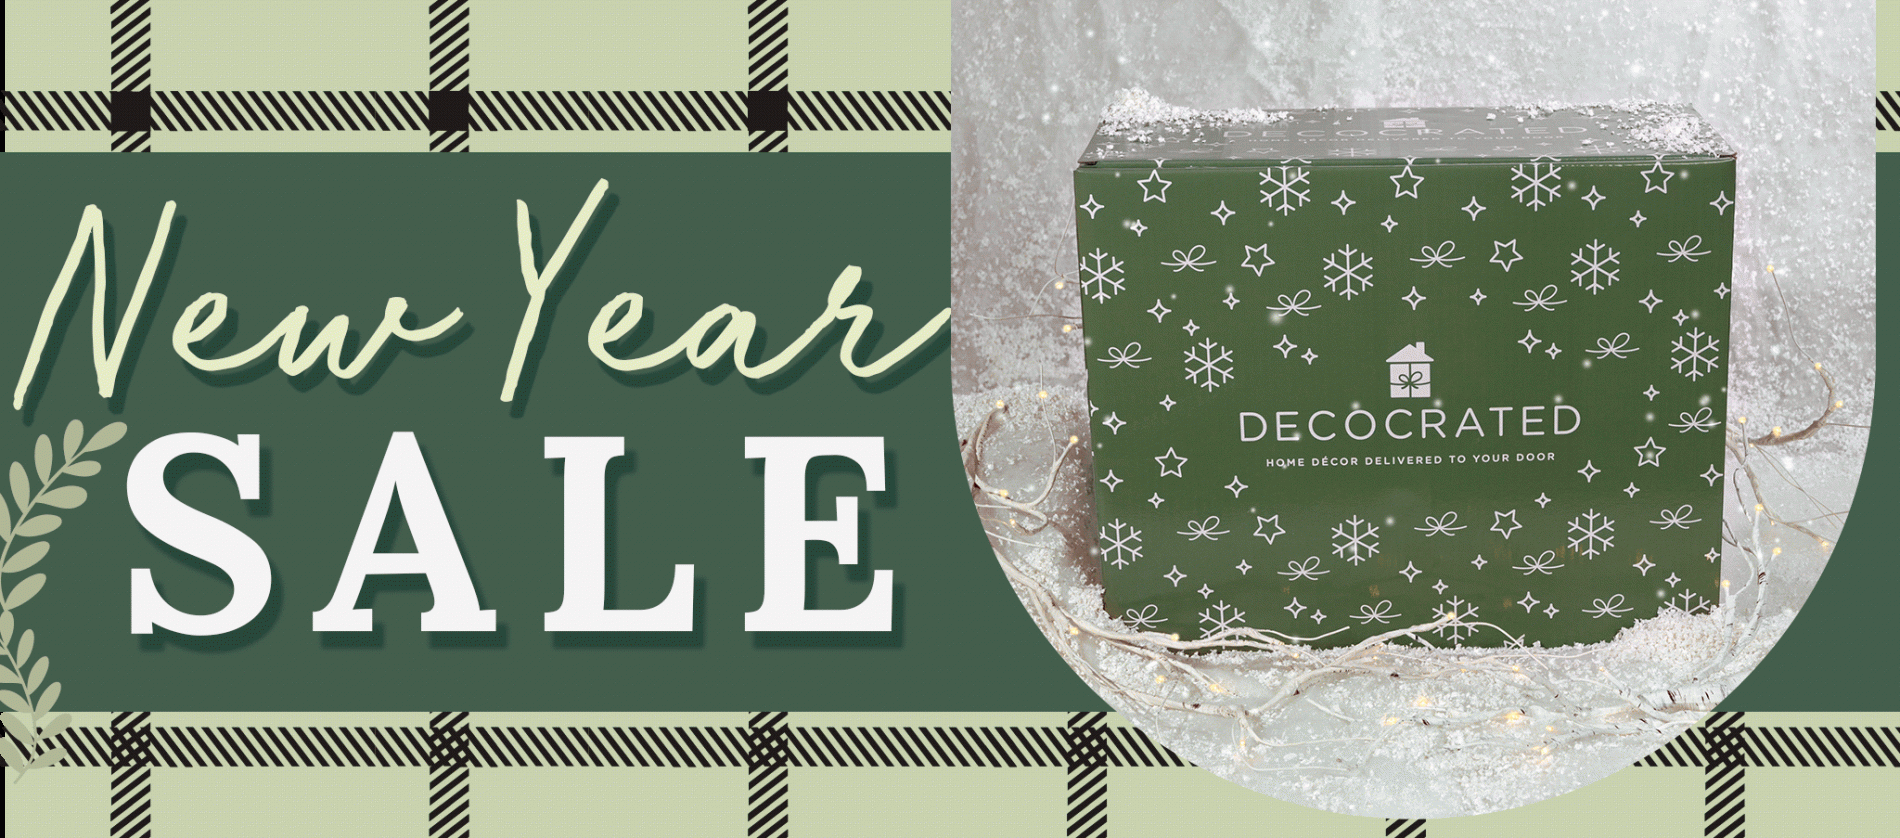 Decocrated New Year’s Sale – Save 40% Off the Winter Box!